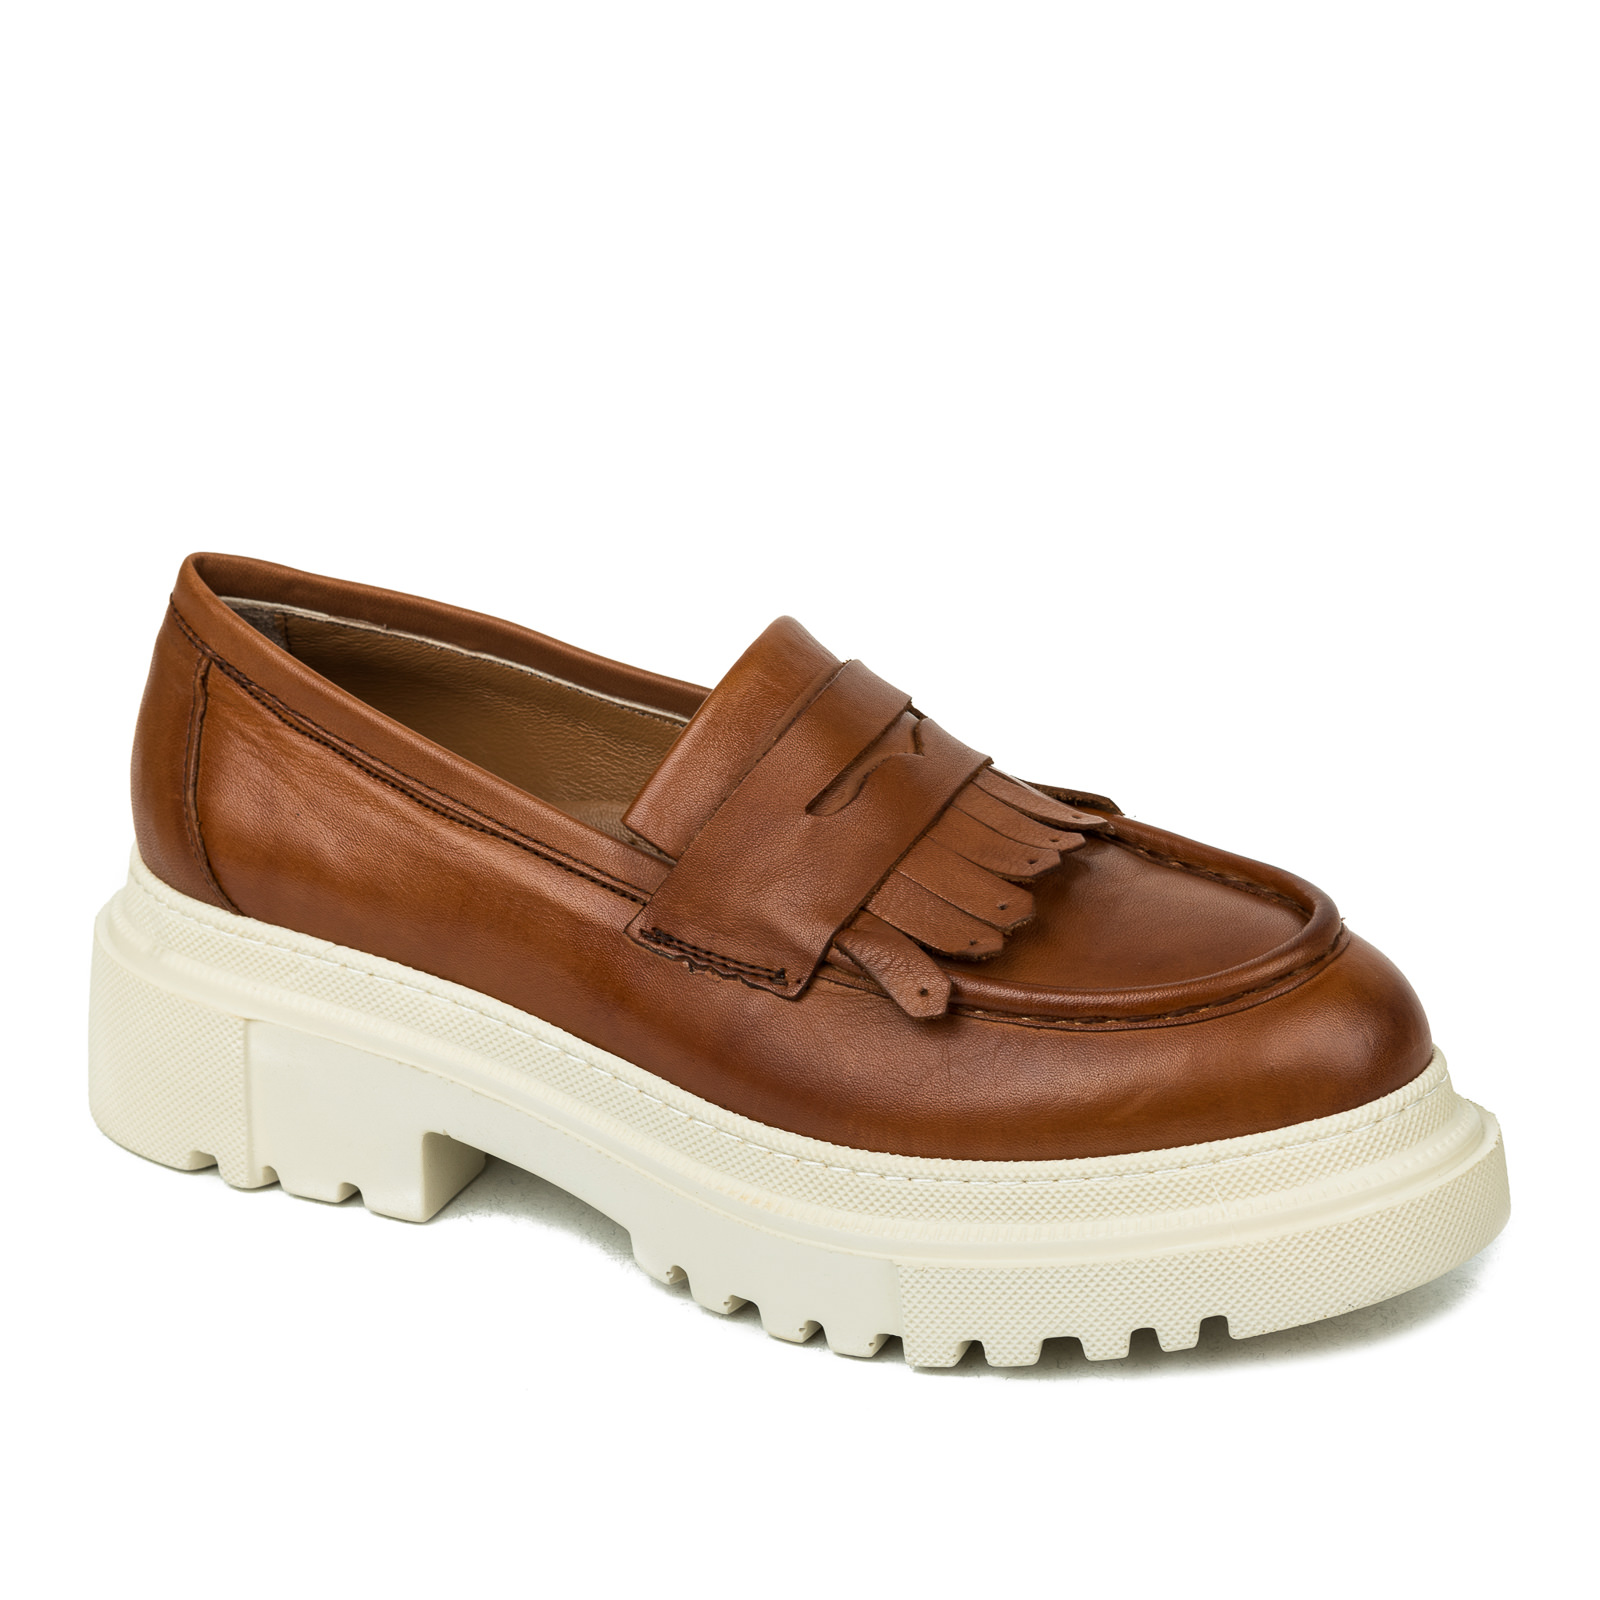 Leather shoes & flats B270 - CAMEL